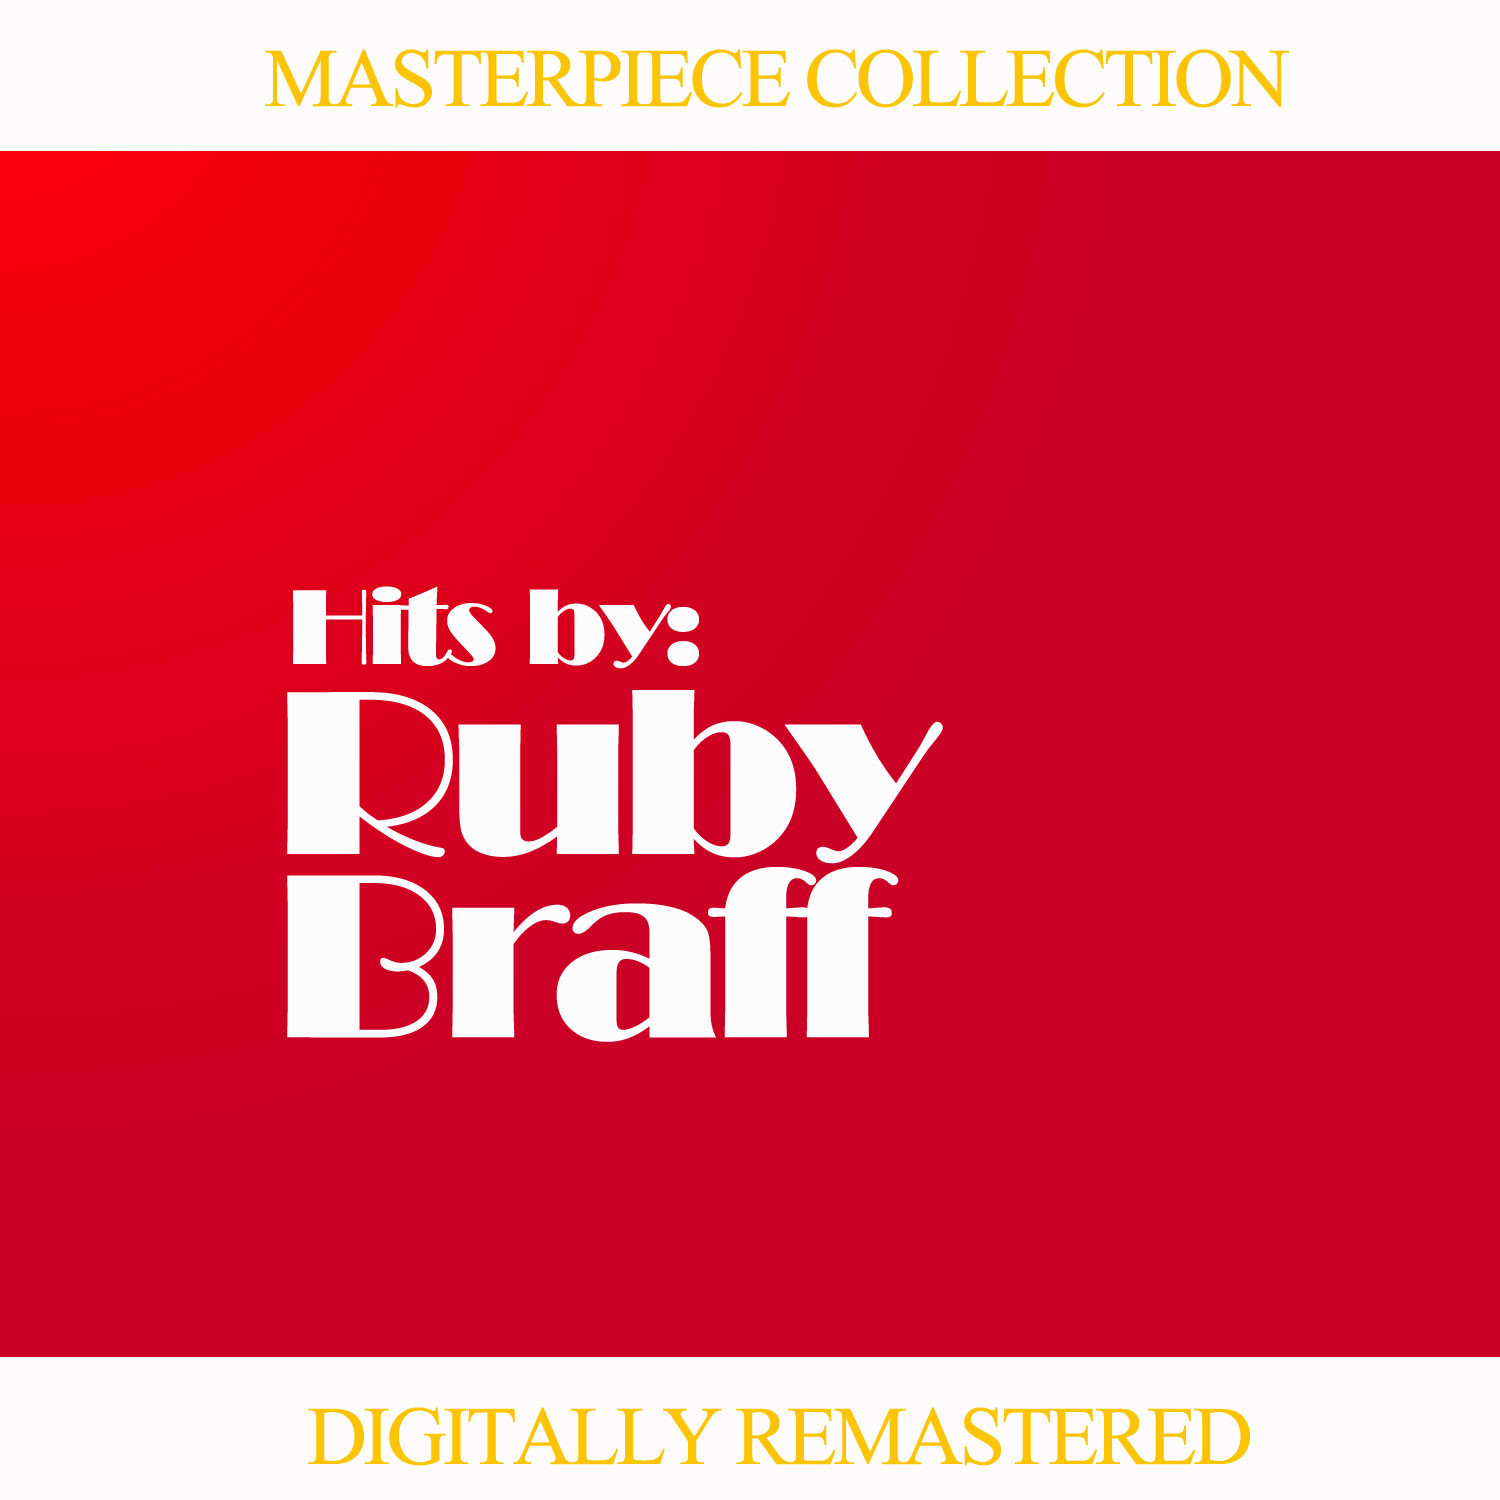 Masterpiece Collection of Ruby Braff